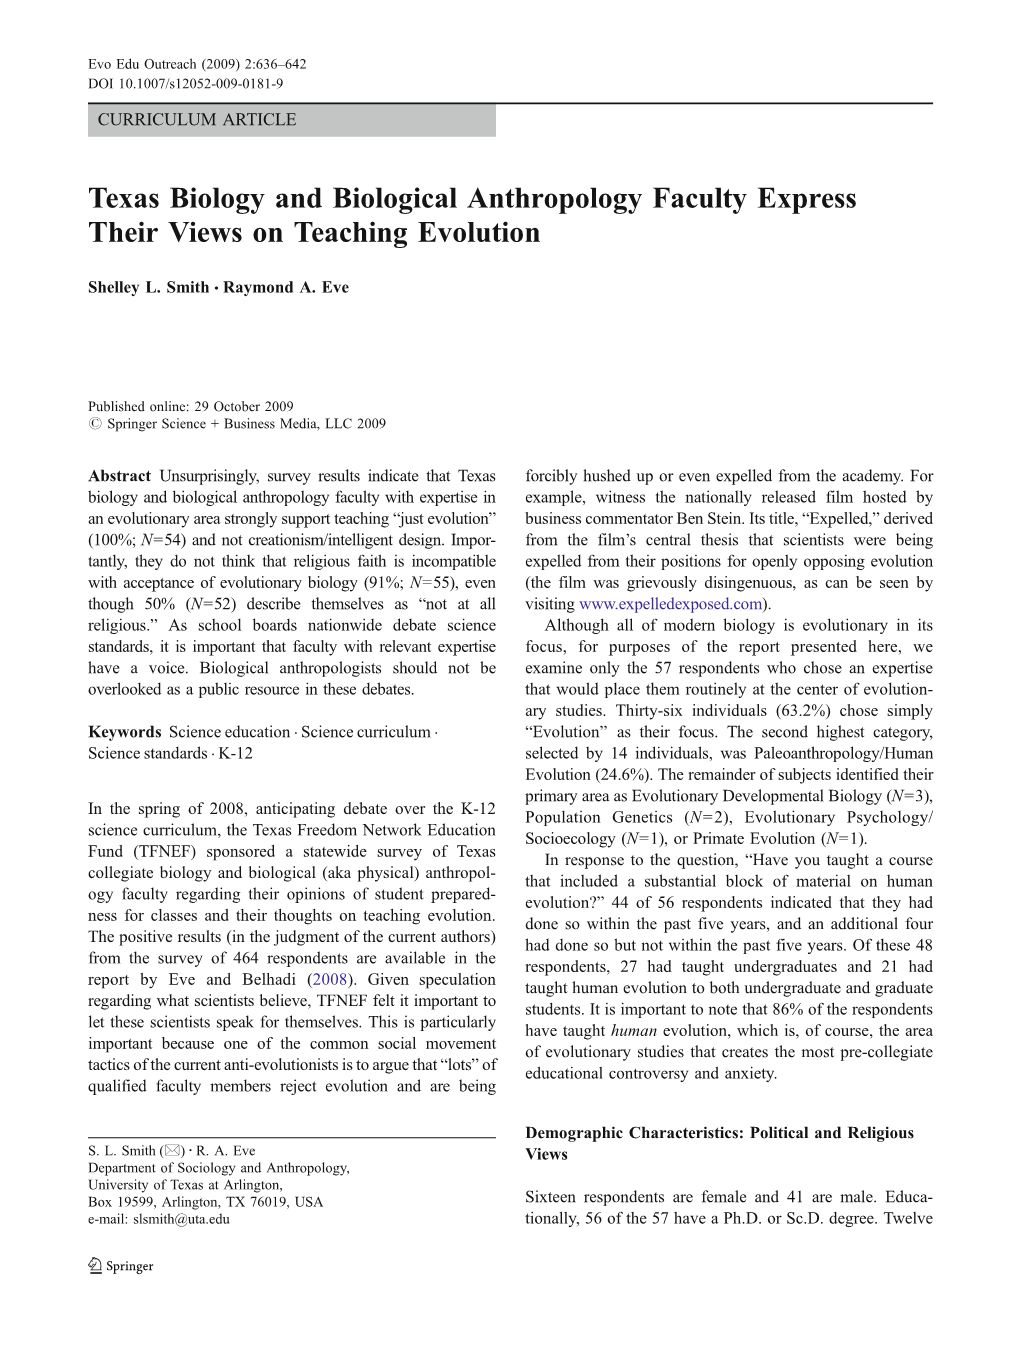 Texas Biology and Biological Anthropology Faculty Express Their Views on Teaching Evolution